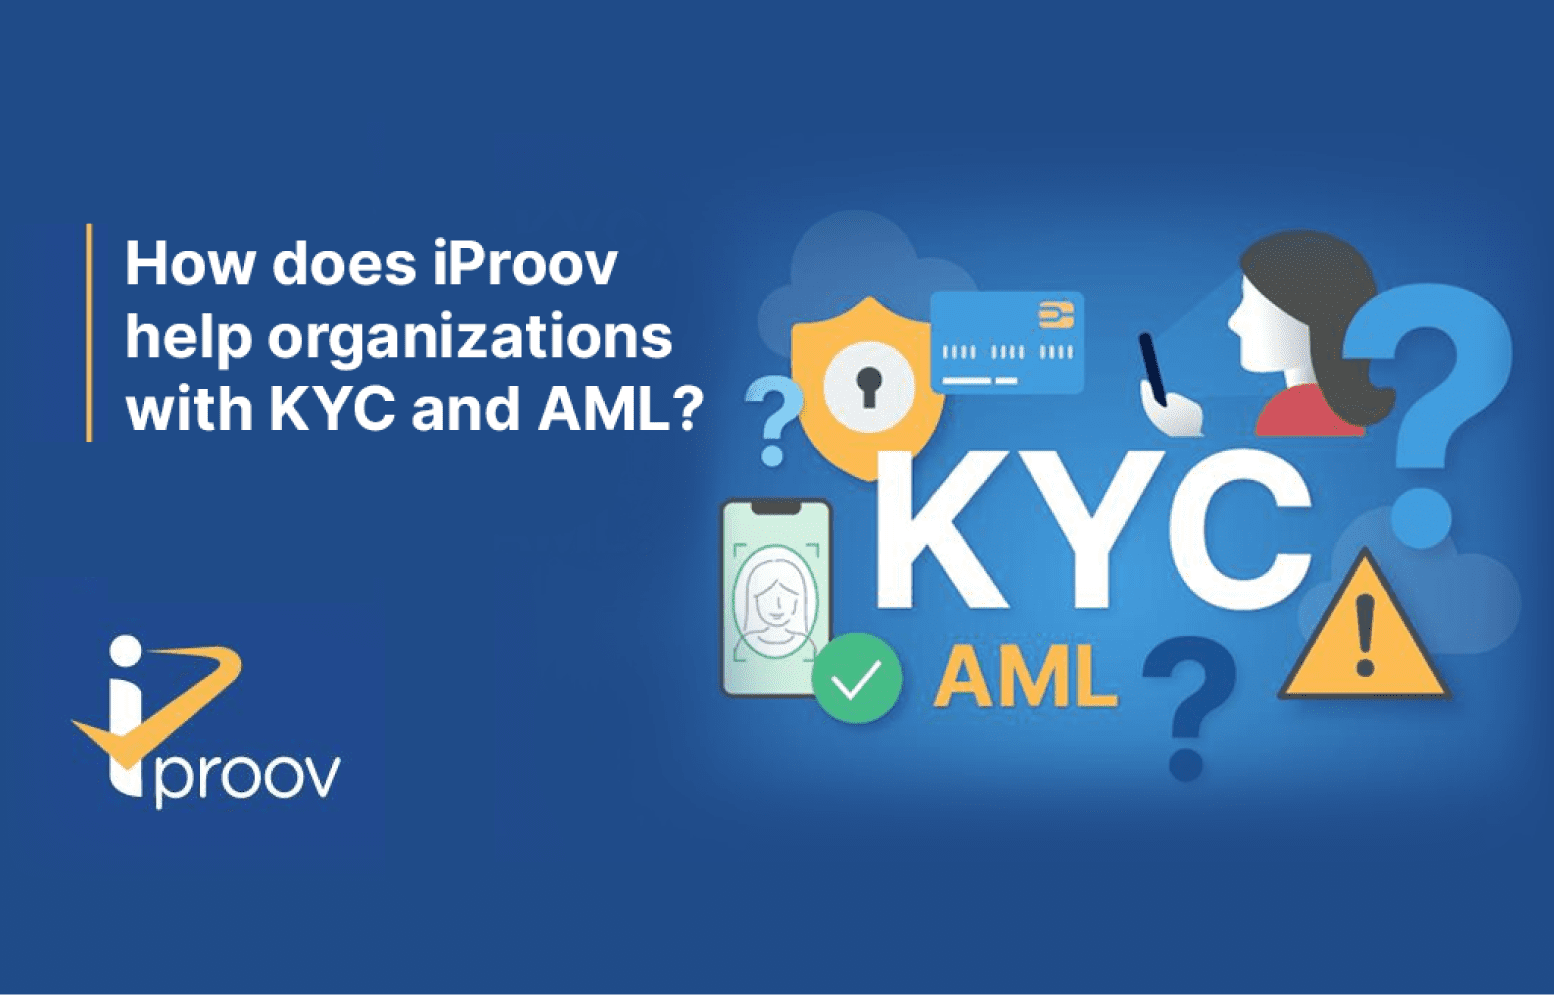 KYC AML: explaining the importance and difference